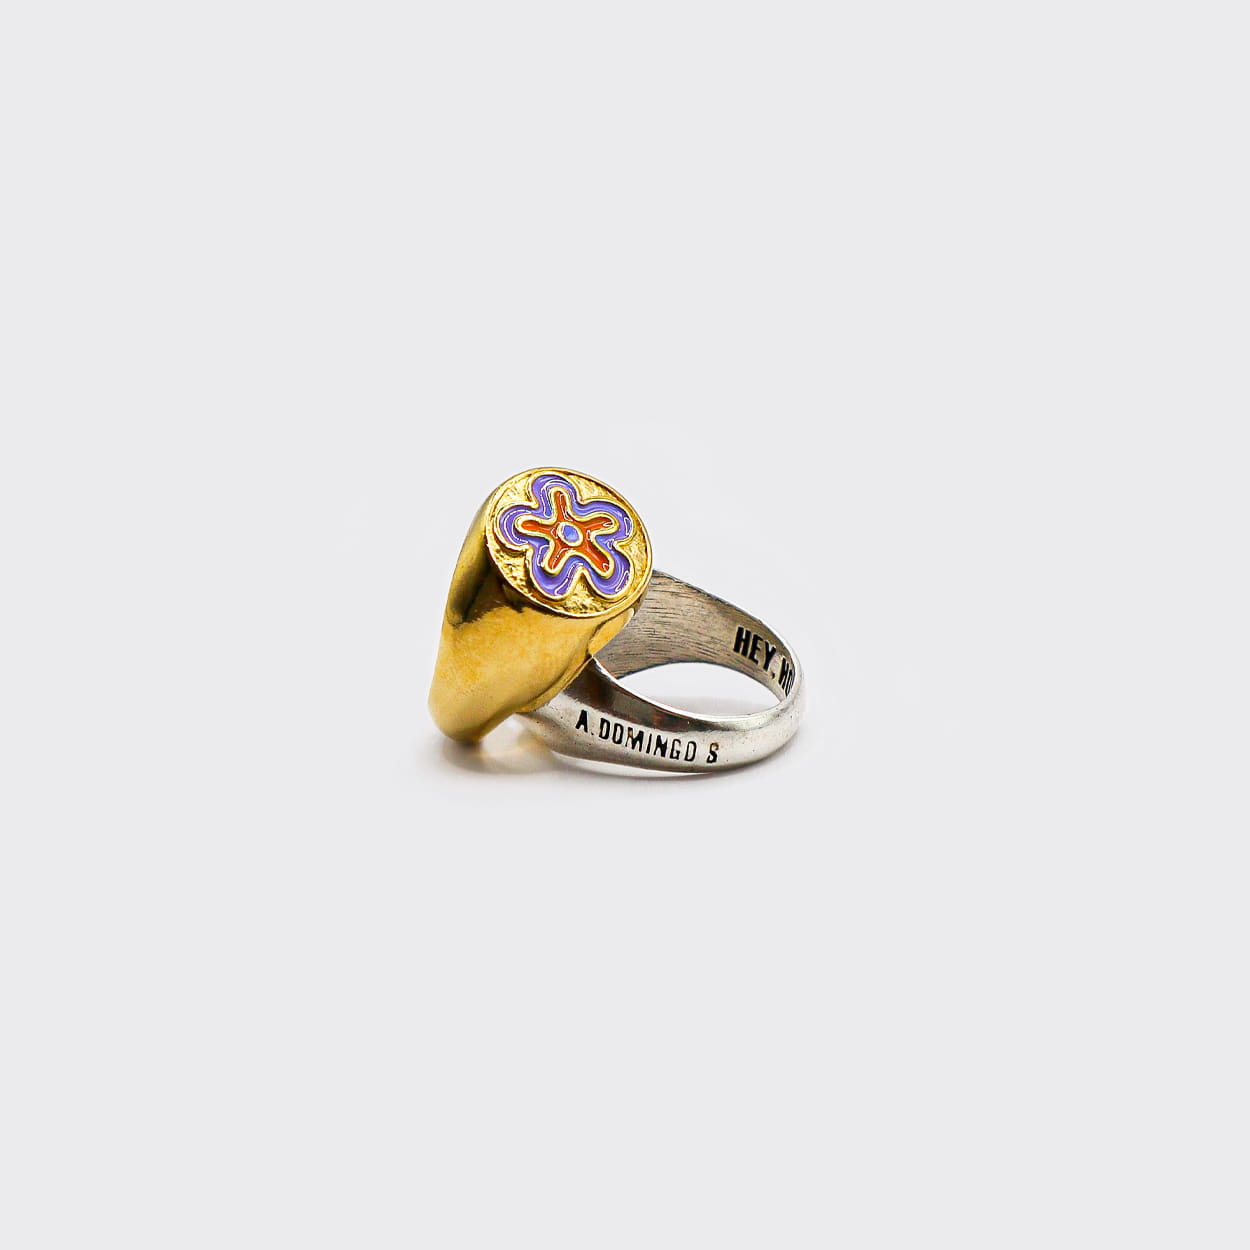 Atelier Domingo's Soul ring is our tribute to the hip-hop group De La Soul. This  ring has been designed in France and is made for both men and women. This jewelry is made of a high-quality 24 karat gold plating.